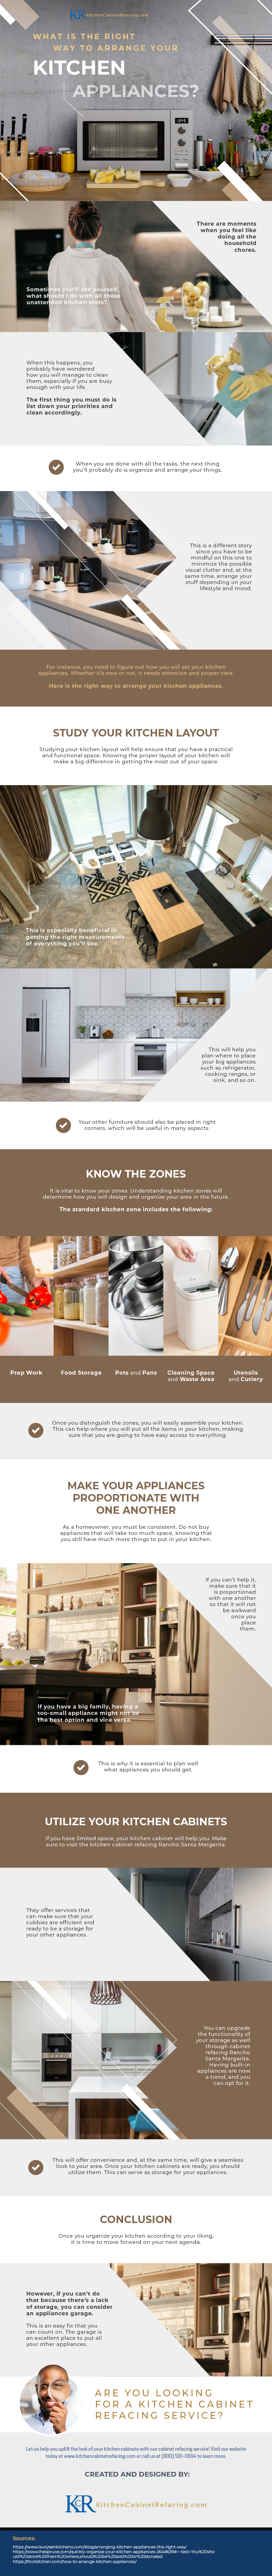 What_is_the_Right_Way_to_Arrange_Your_Kitchen_Appliances_infographic_image